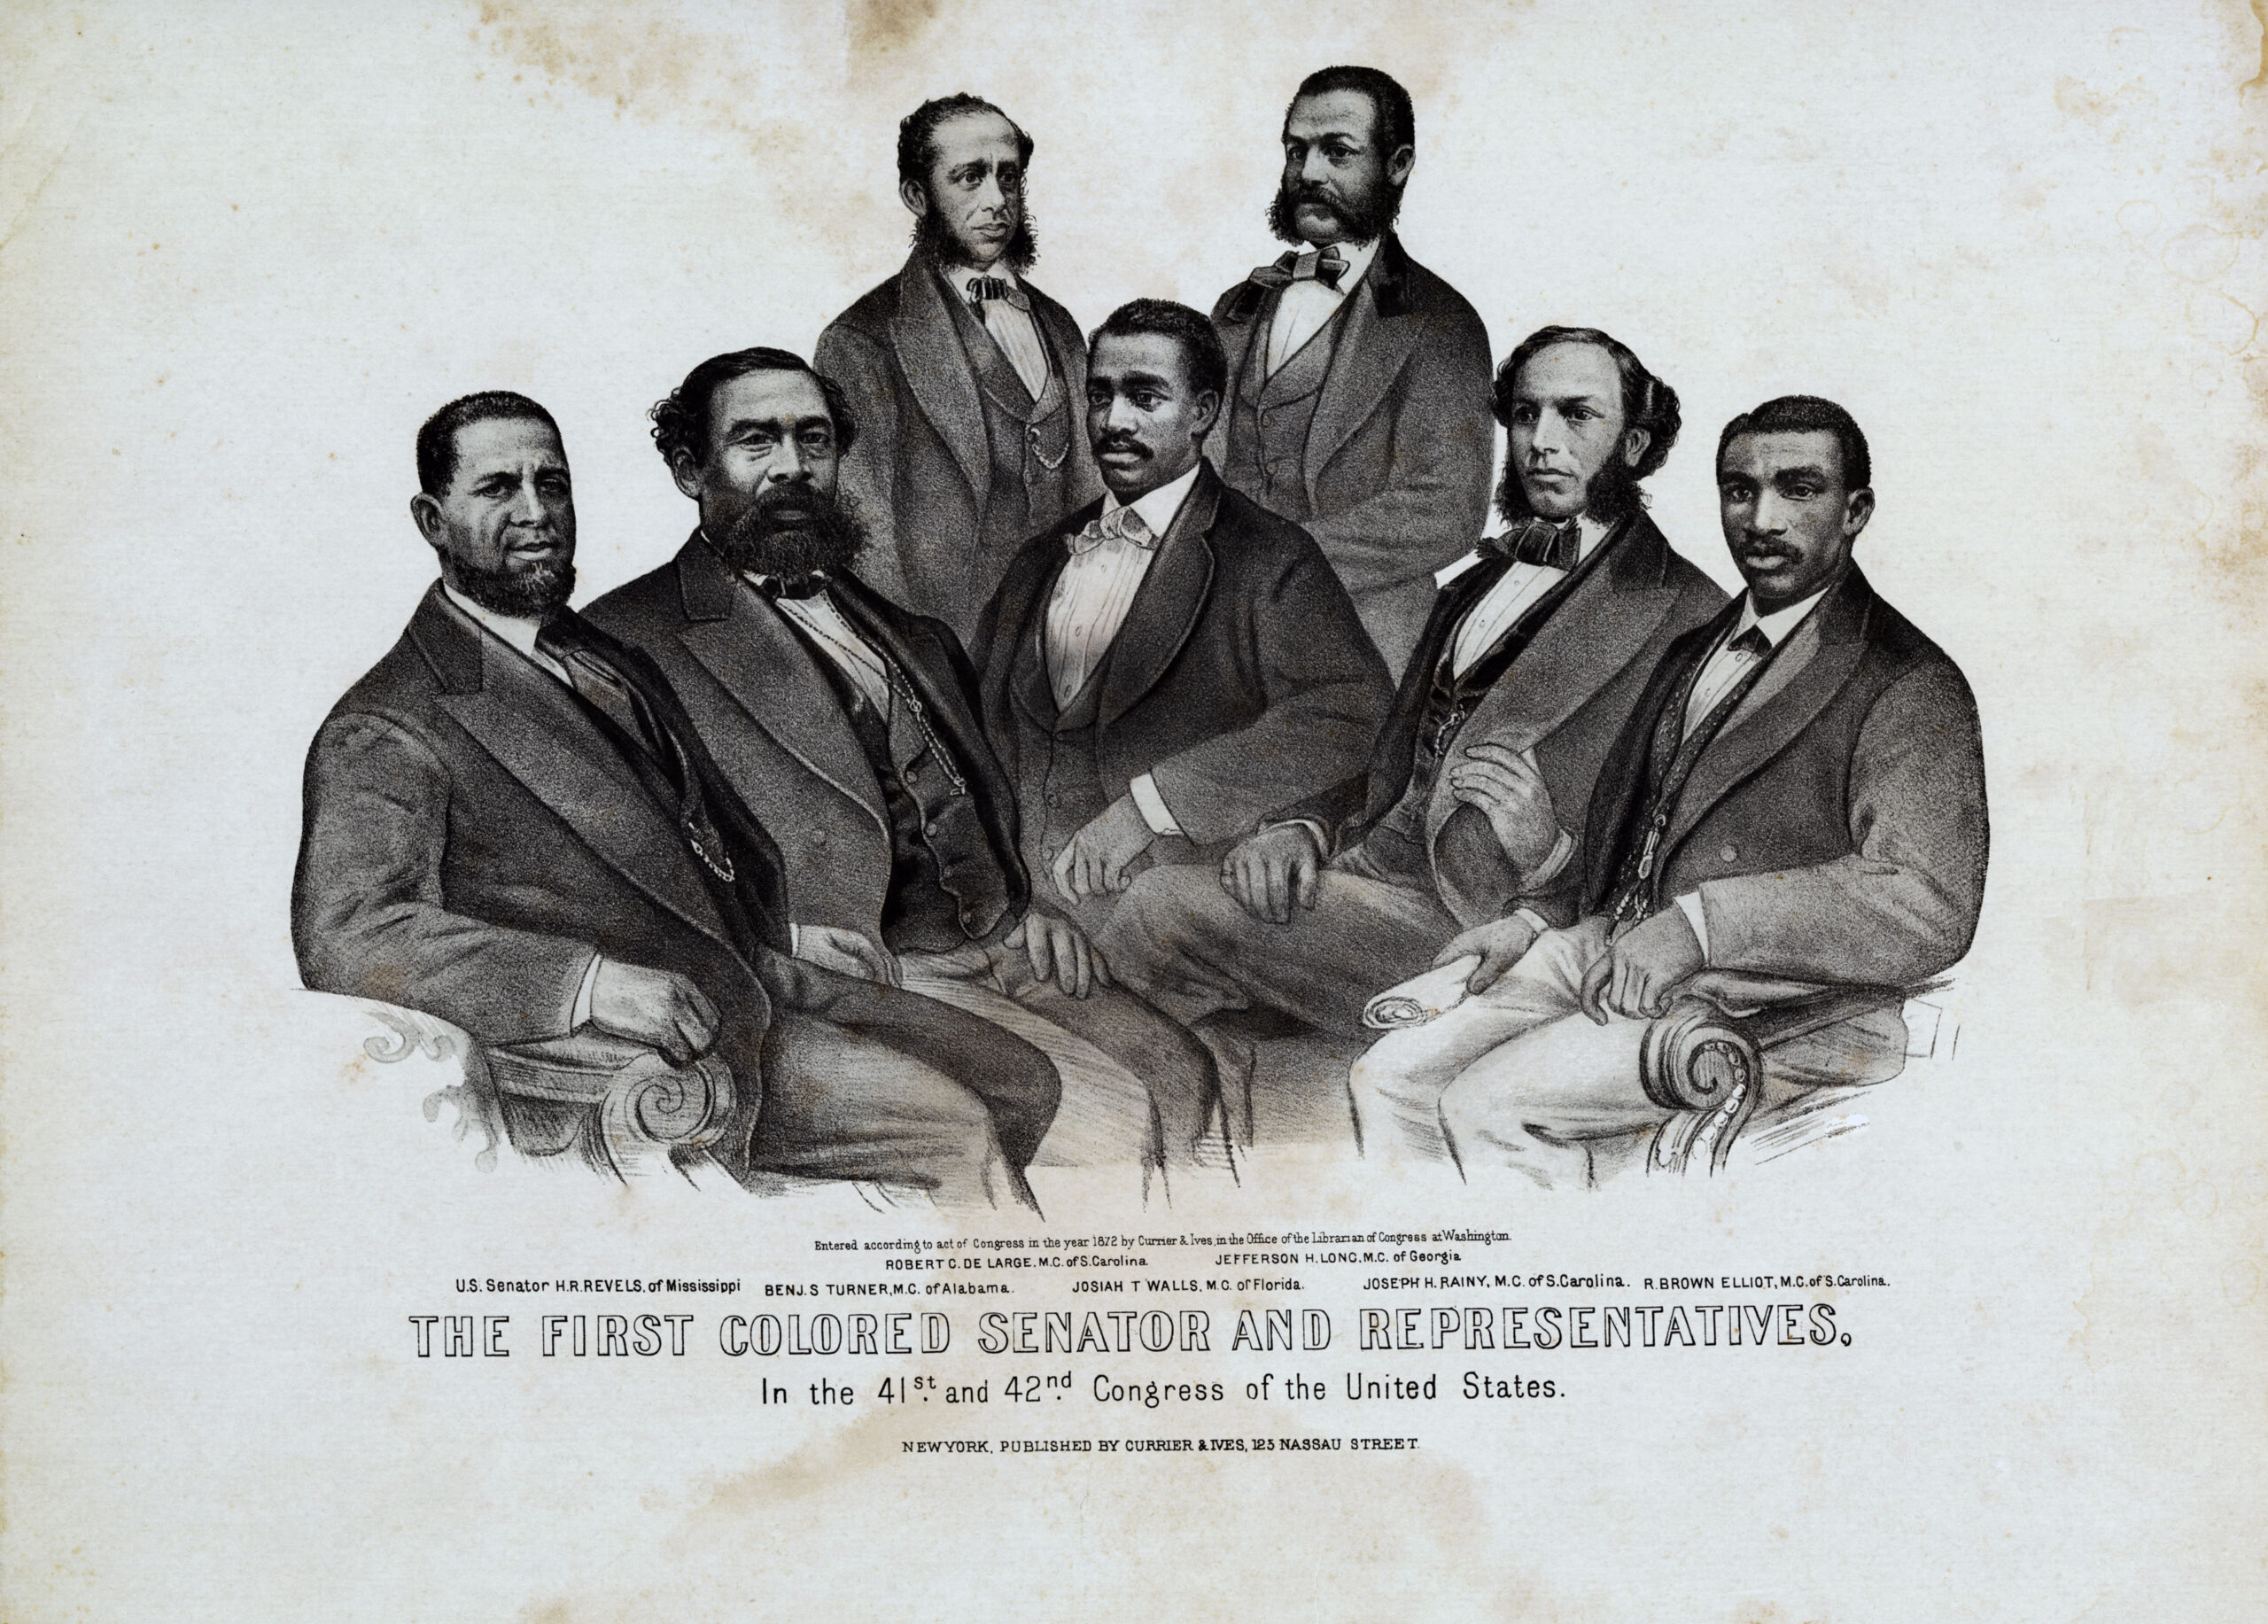 Black leaders during Reconstruction